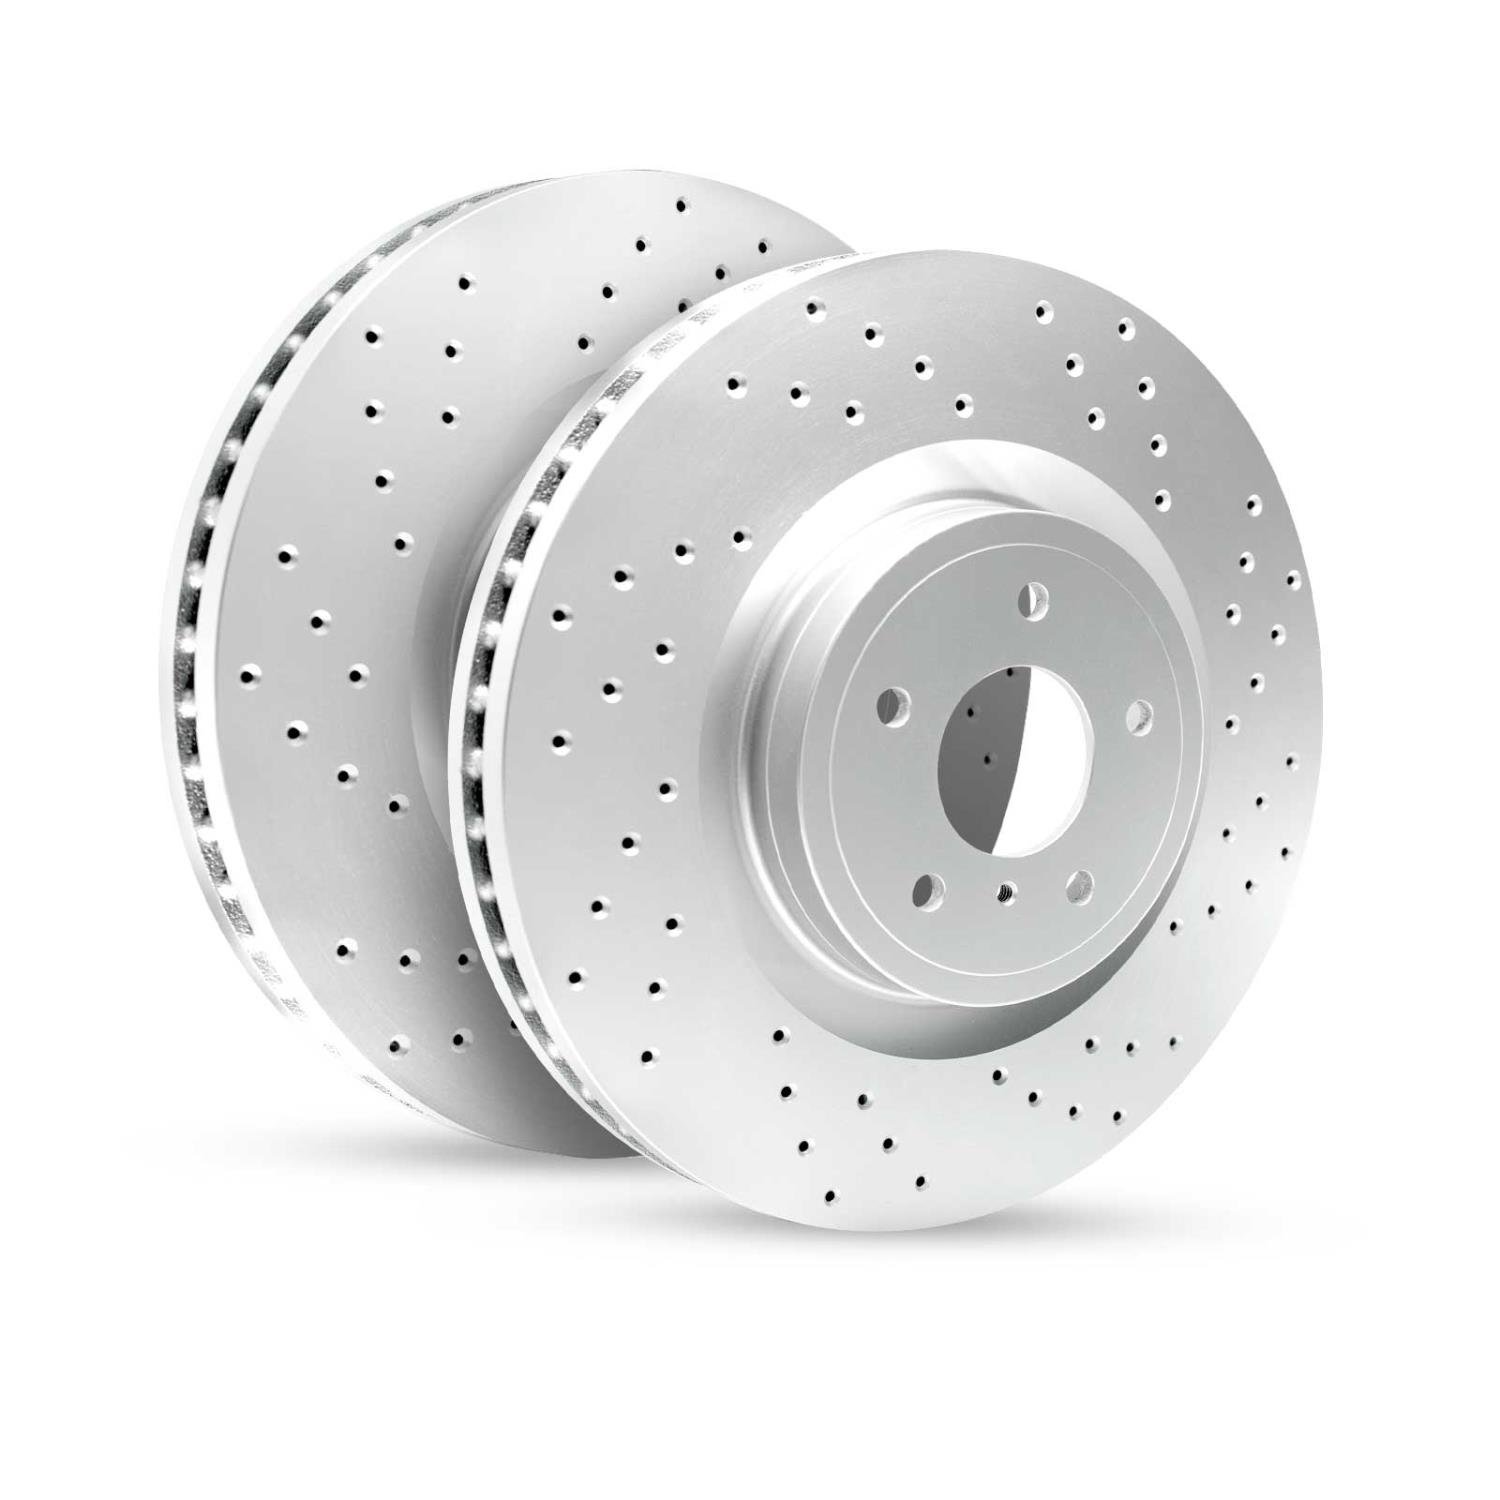 GEO-Carbon Drilled/Slotted Rotors, 2003-2006 Fits Multiple Makes/Models, Position: Front